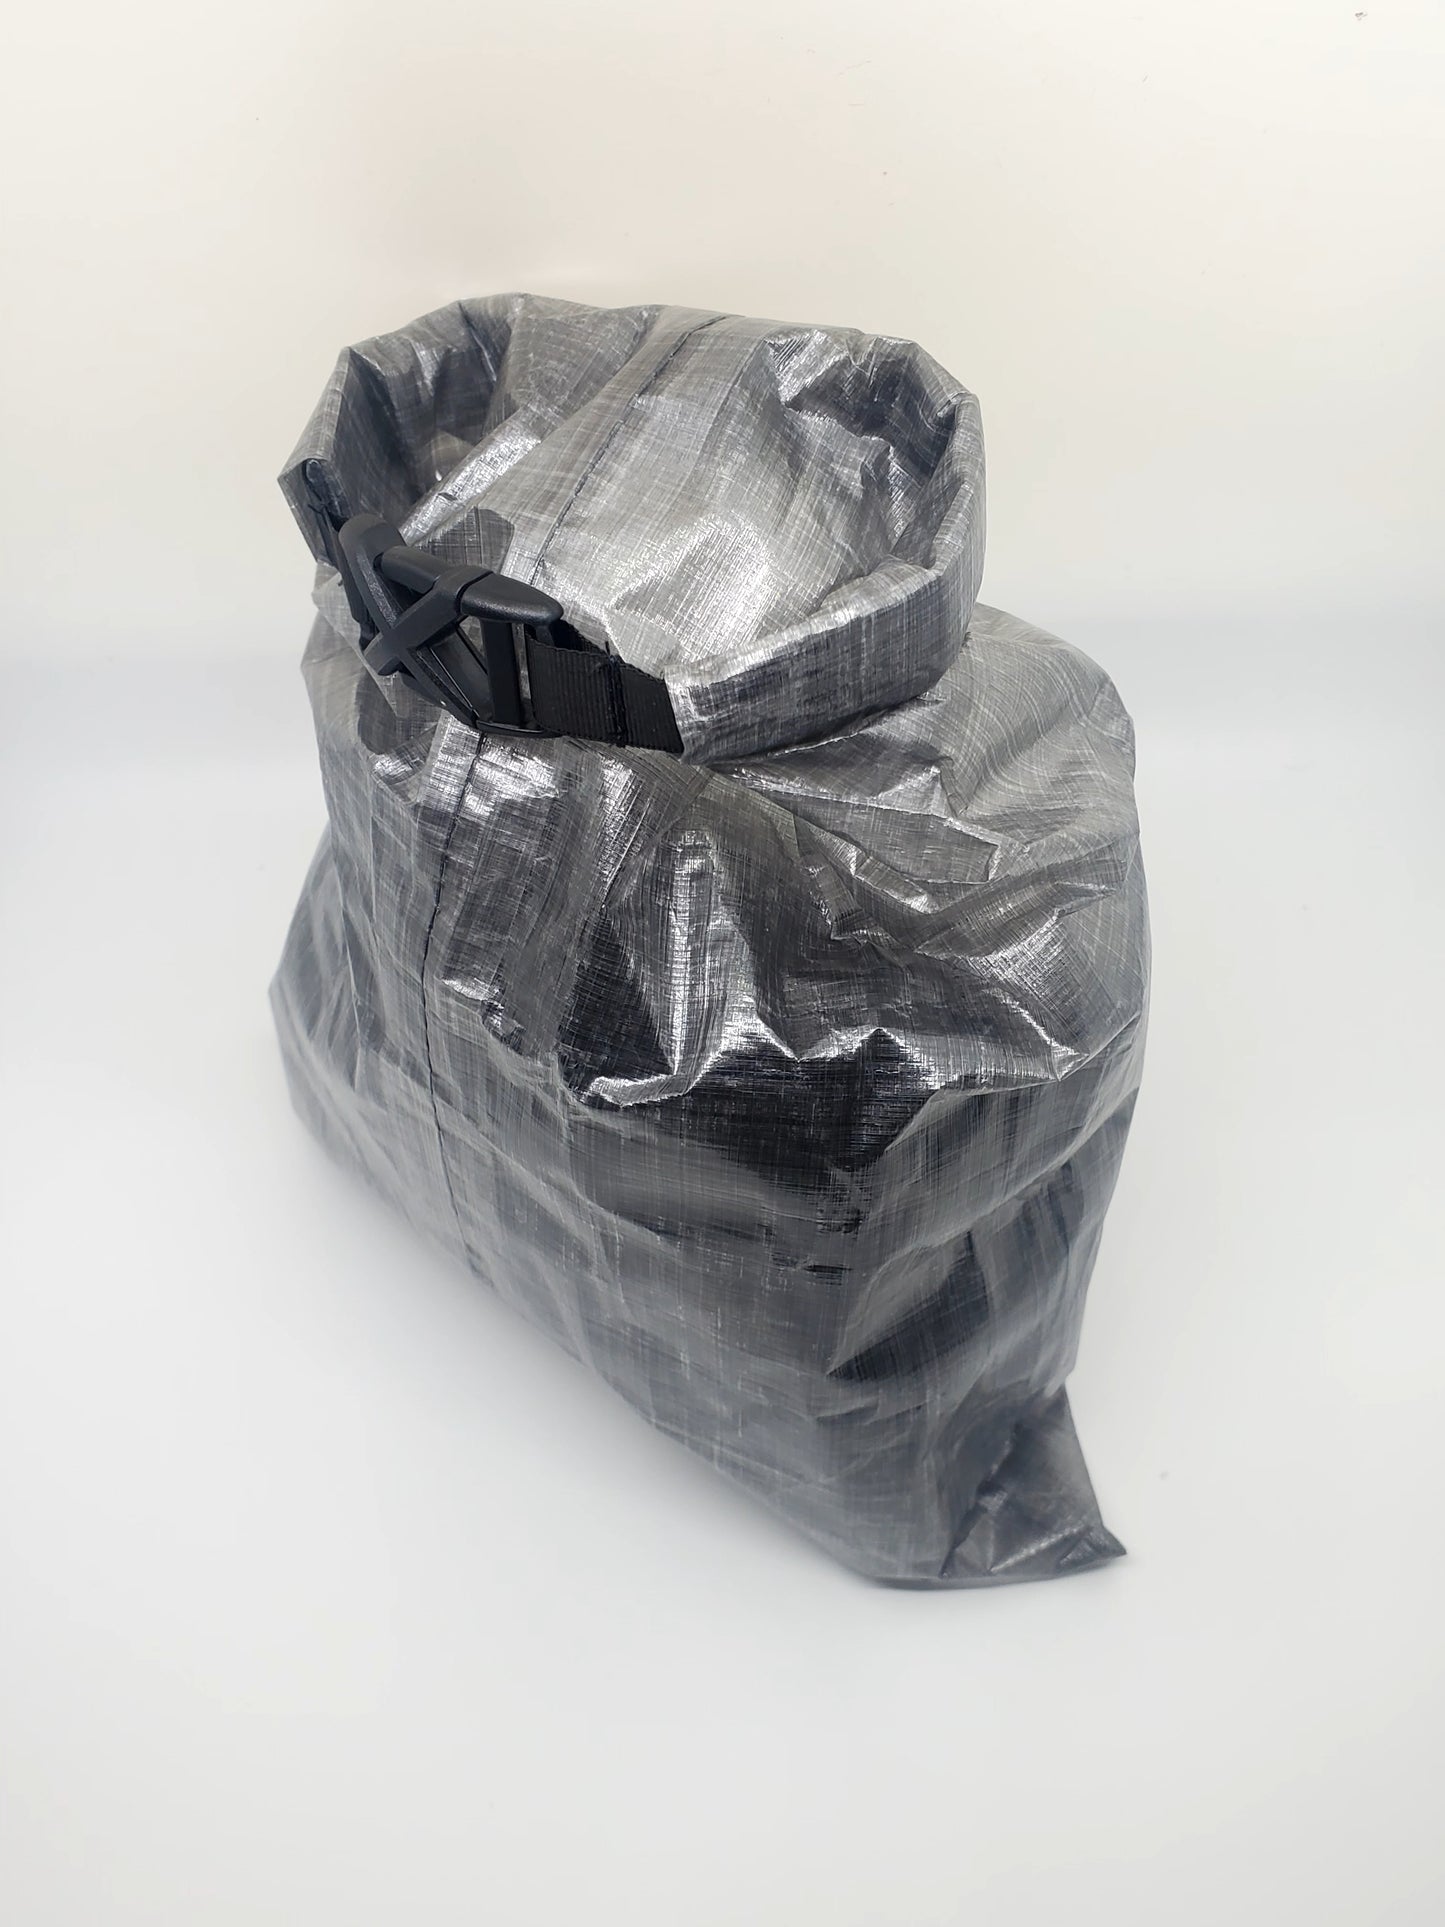 Medium Dyneema Roll Top Sack: Ultralight, Eco-Friendly & Perfect for Outdoors